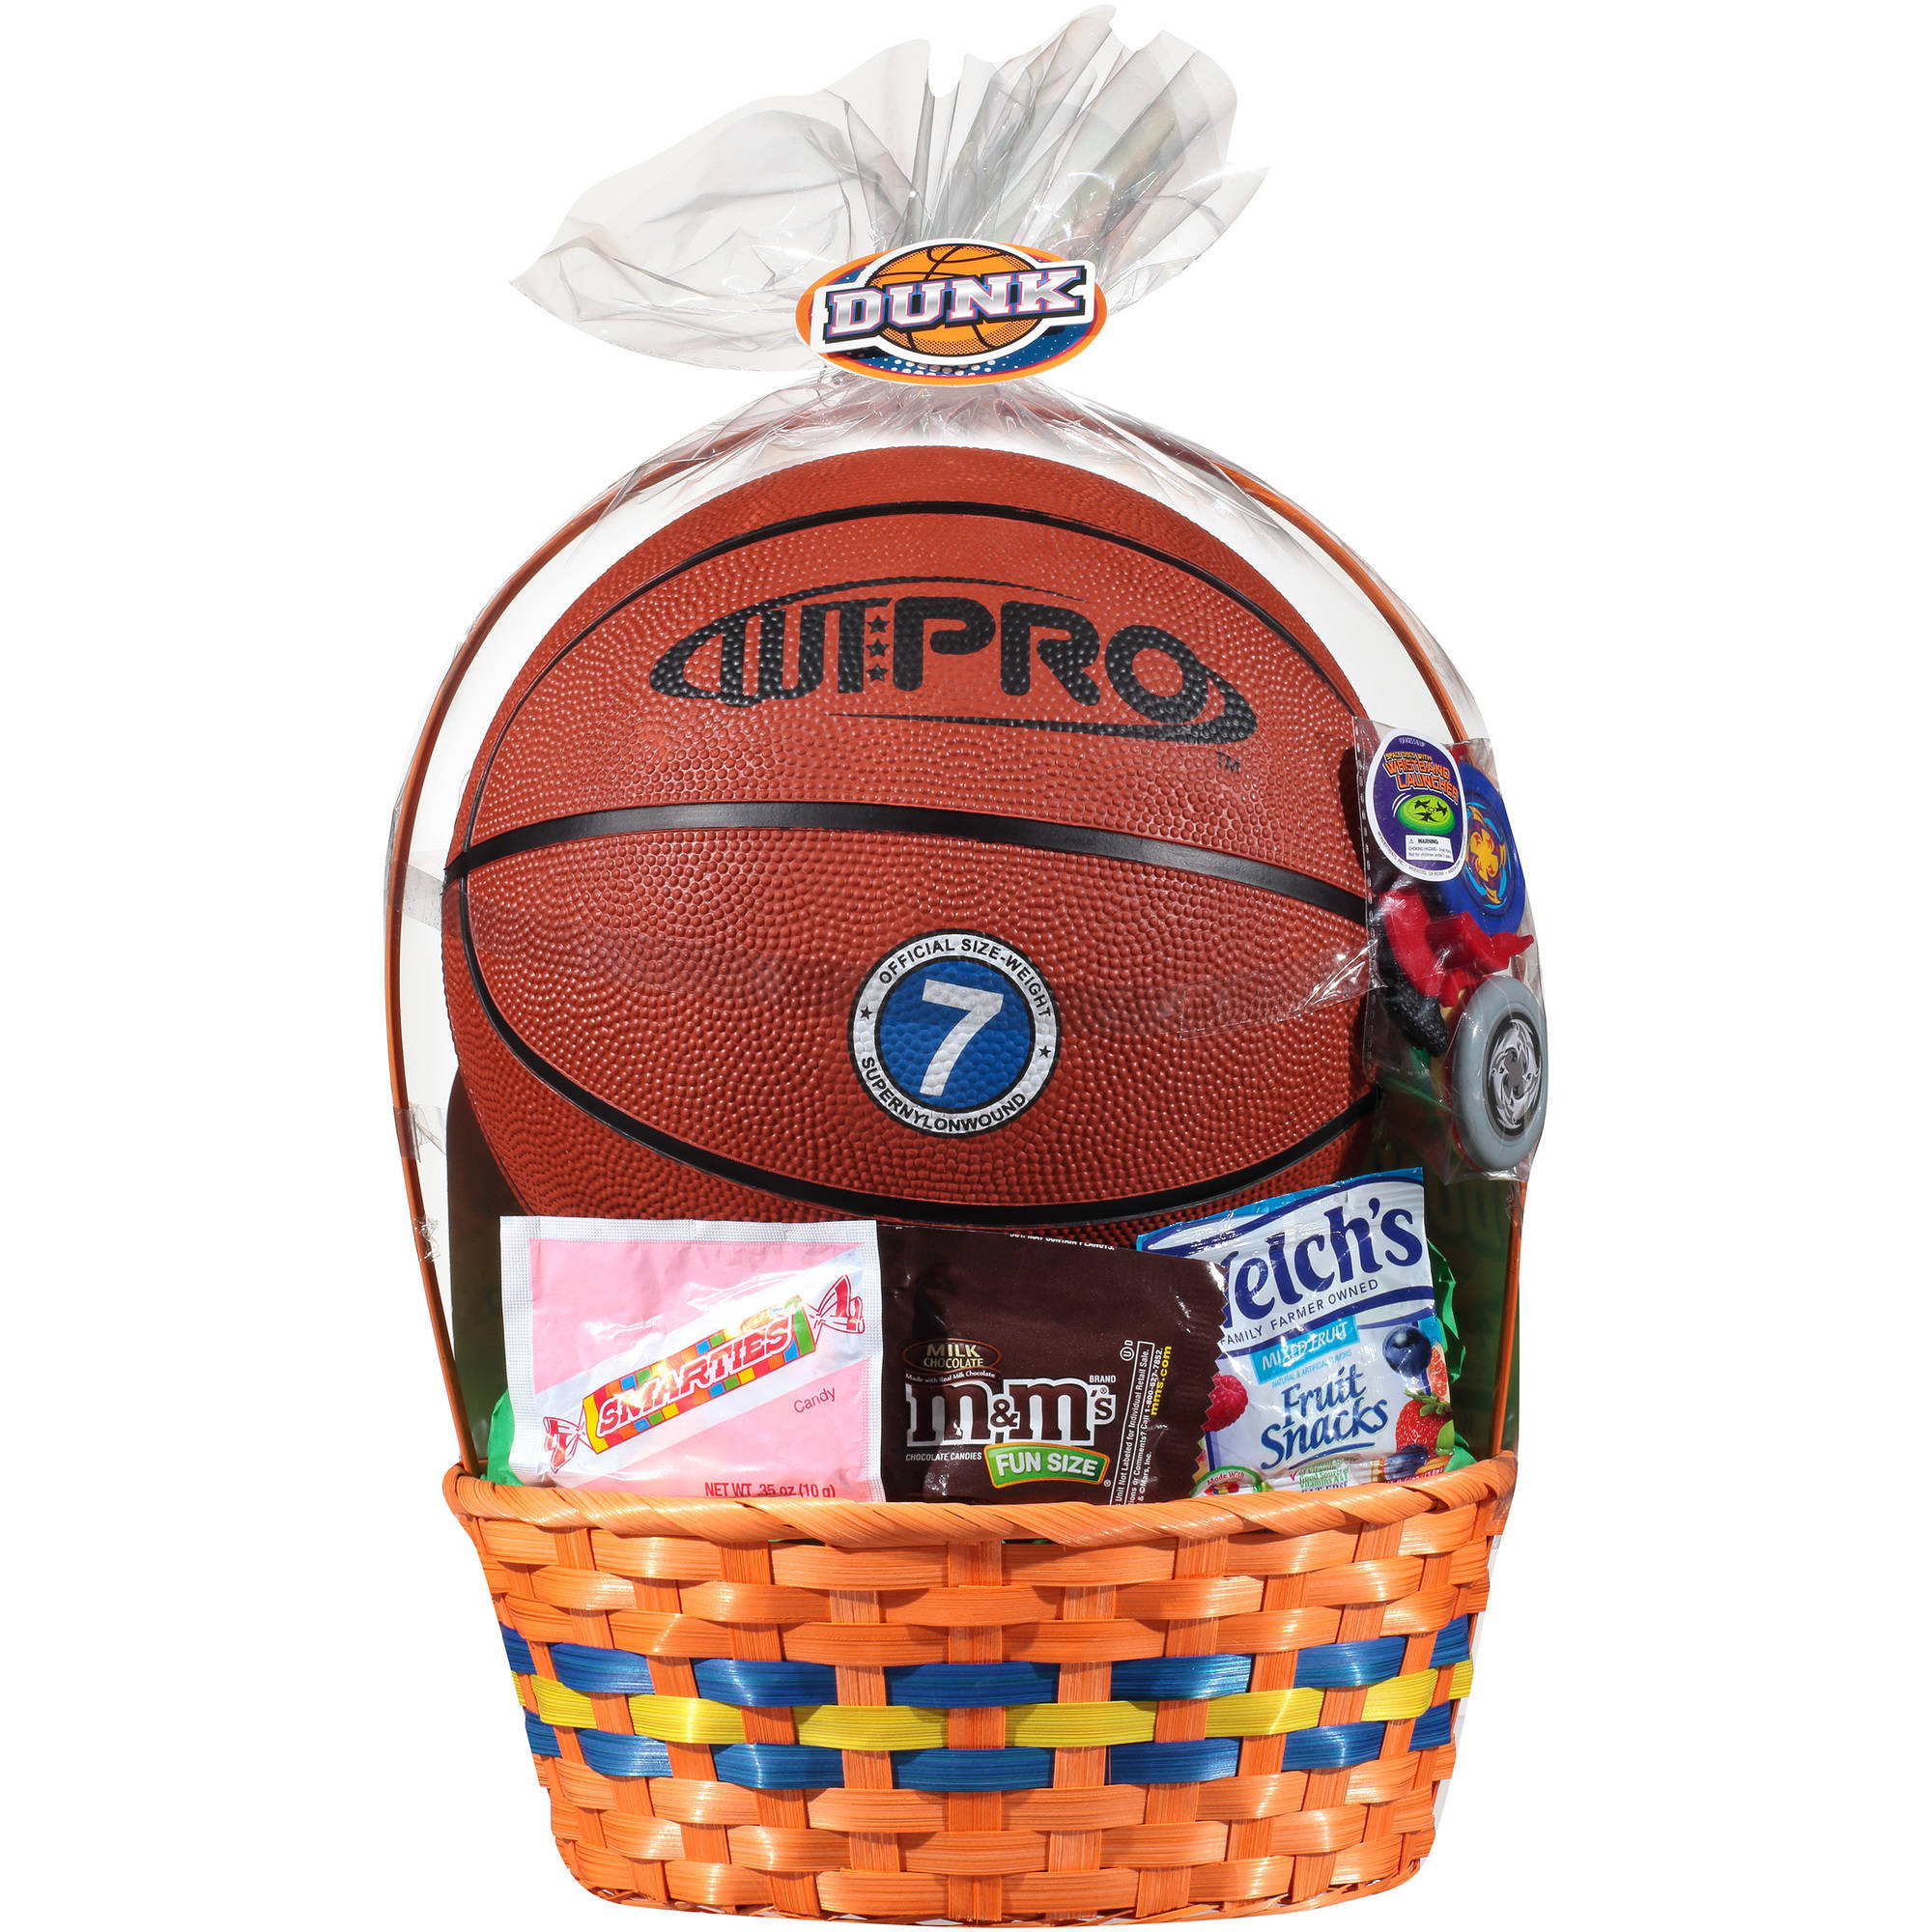 Walmart Easter Gifts
 Wondertreats Basketball Dunk with Toys and Assorted